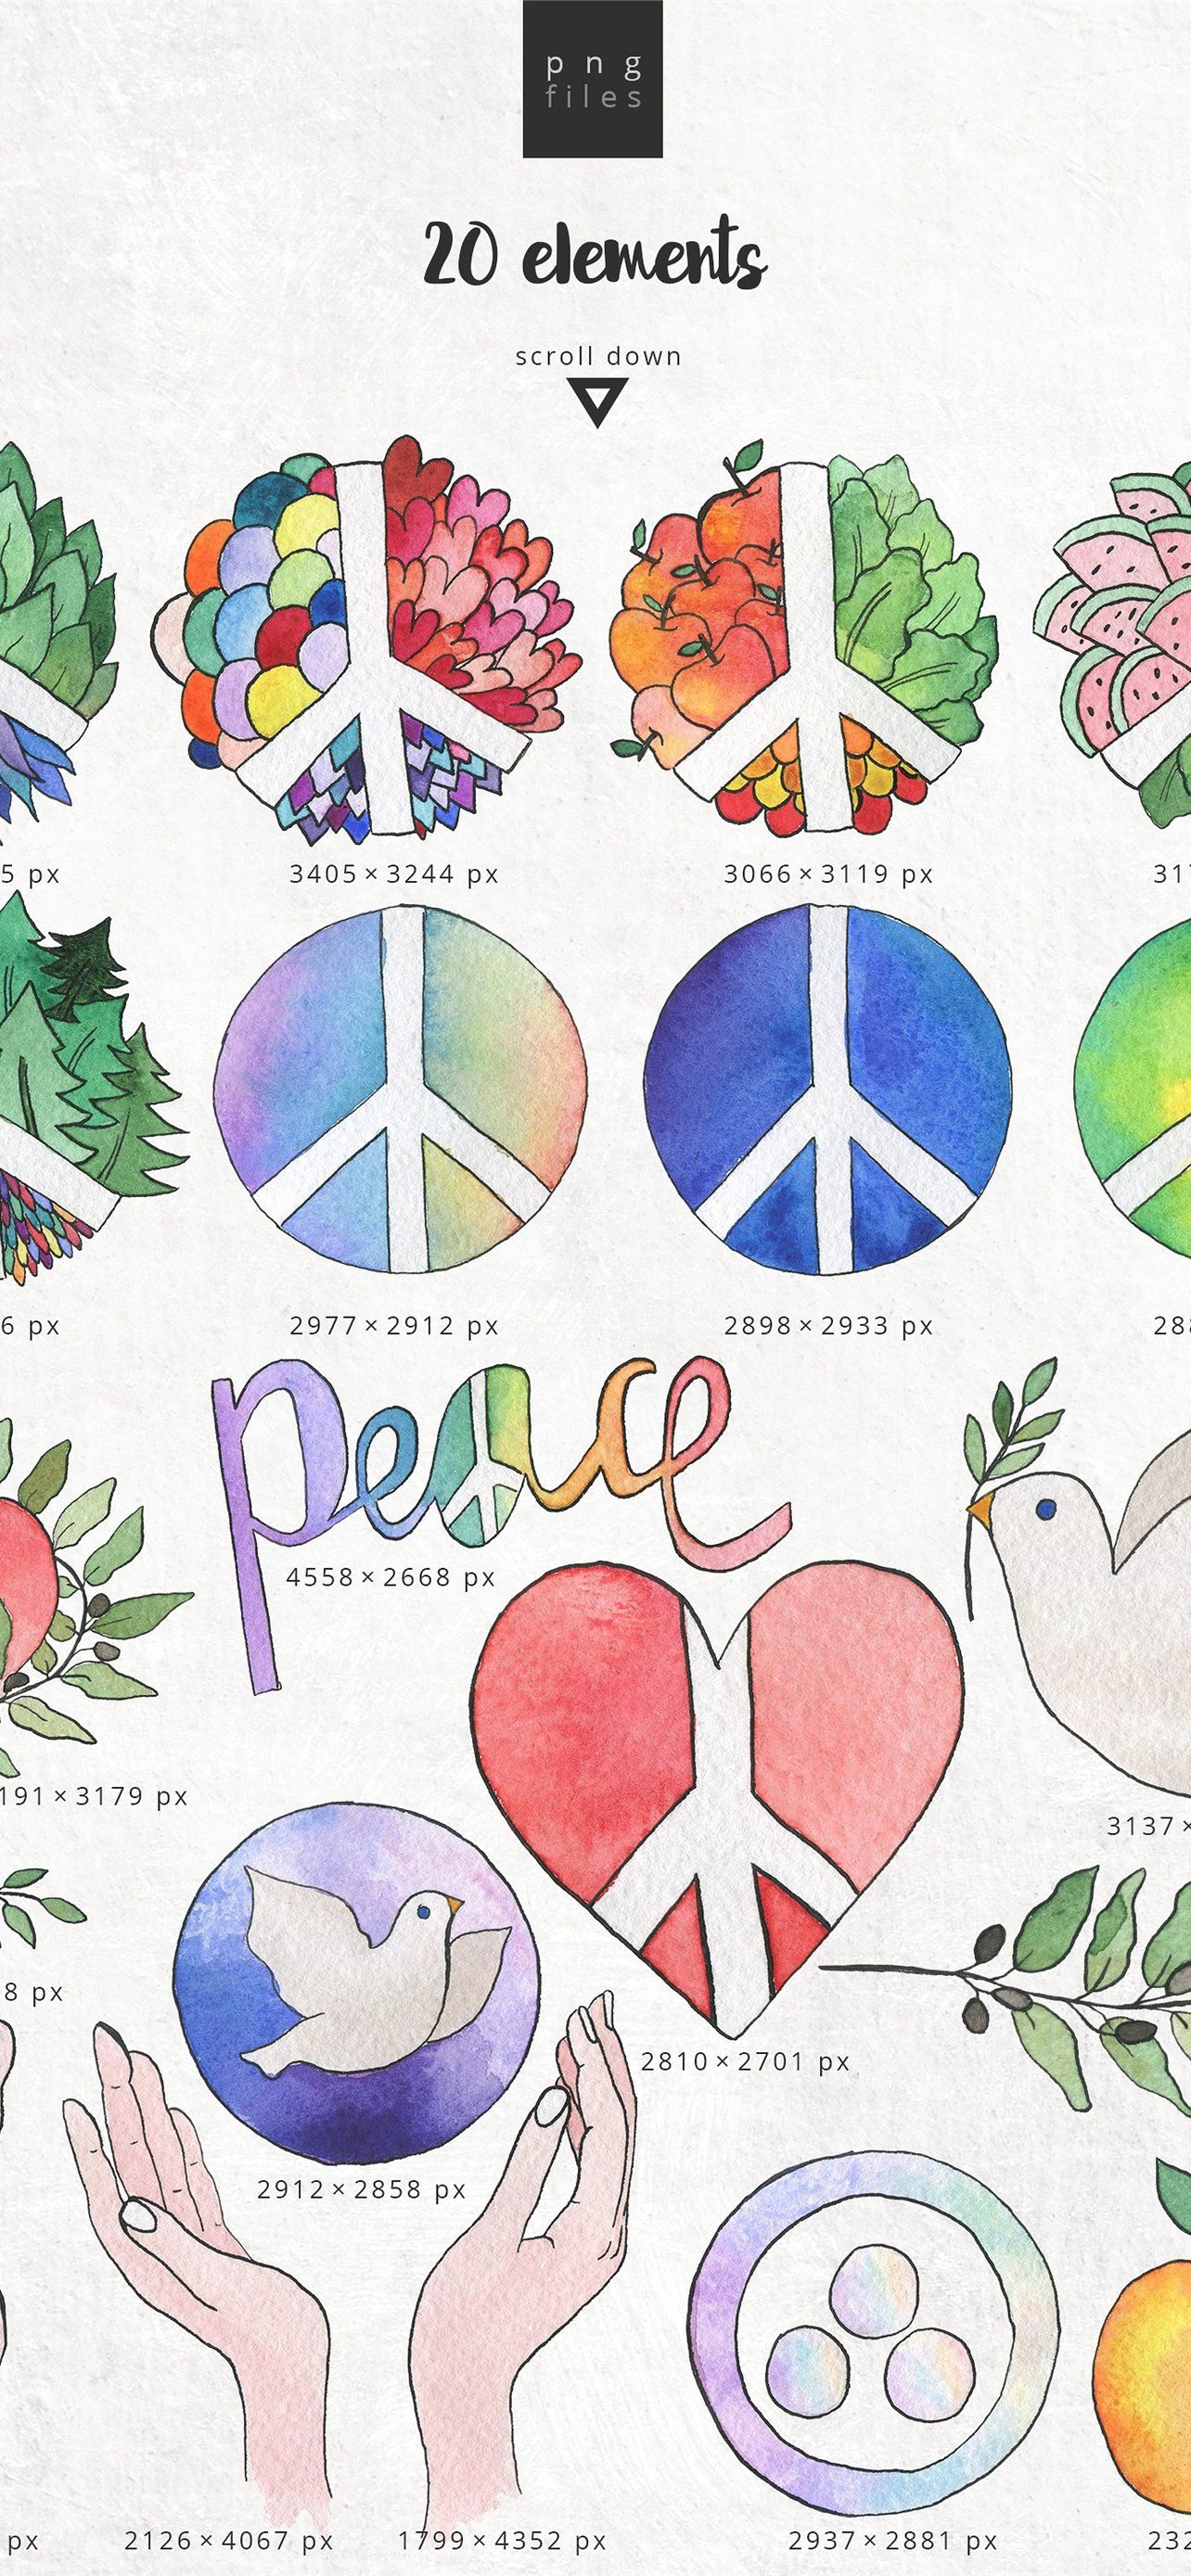 international day of peace iPhone Wallpapers Free Download